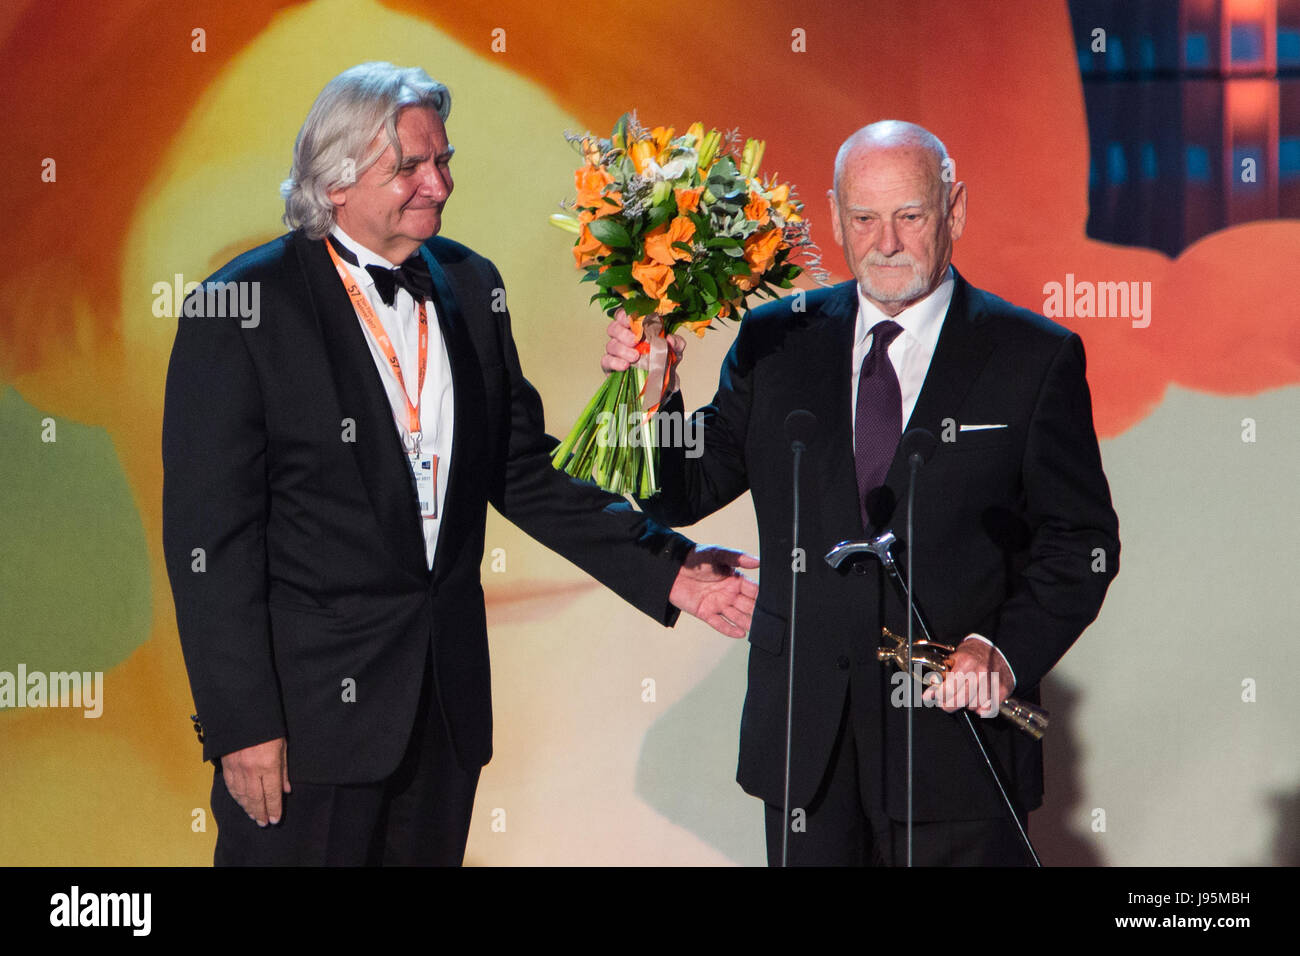 Zlin, Czech Republic. 02nd June, 2017. Czech artist and costume designer Theodor Pistek, 84, right, Oscar winner for his costumes in Milos Forman's film Amadeus (1984), received the Golden Slipper for outstanding contribution to cinematography for children and youth at the 57th International Film Festival for Children and Youth in Zlin, Czech Republic, June 2, 2017. At left: Festival's President Cestmir Vancura. Credit: Josef Omelka/CTK Photo/Alamy Live News Stock Photo